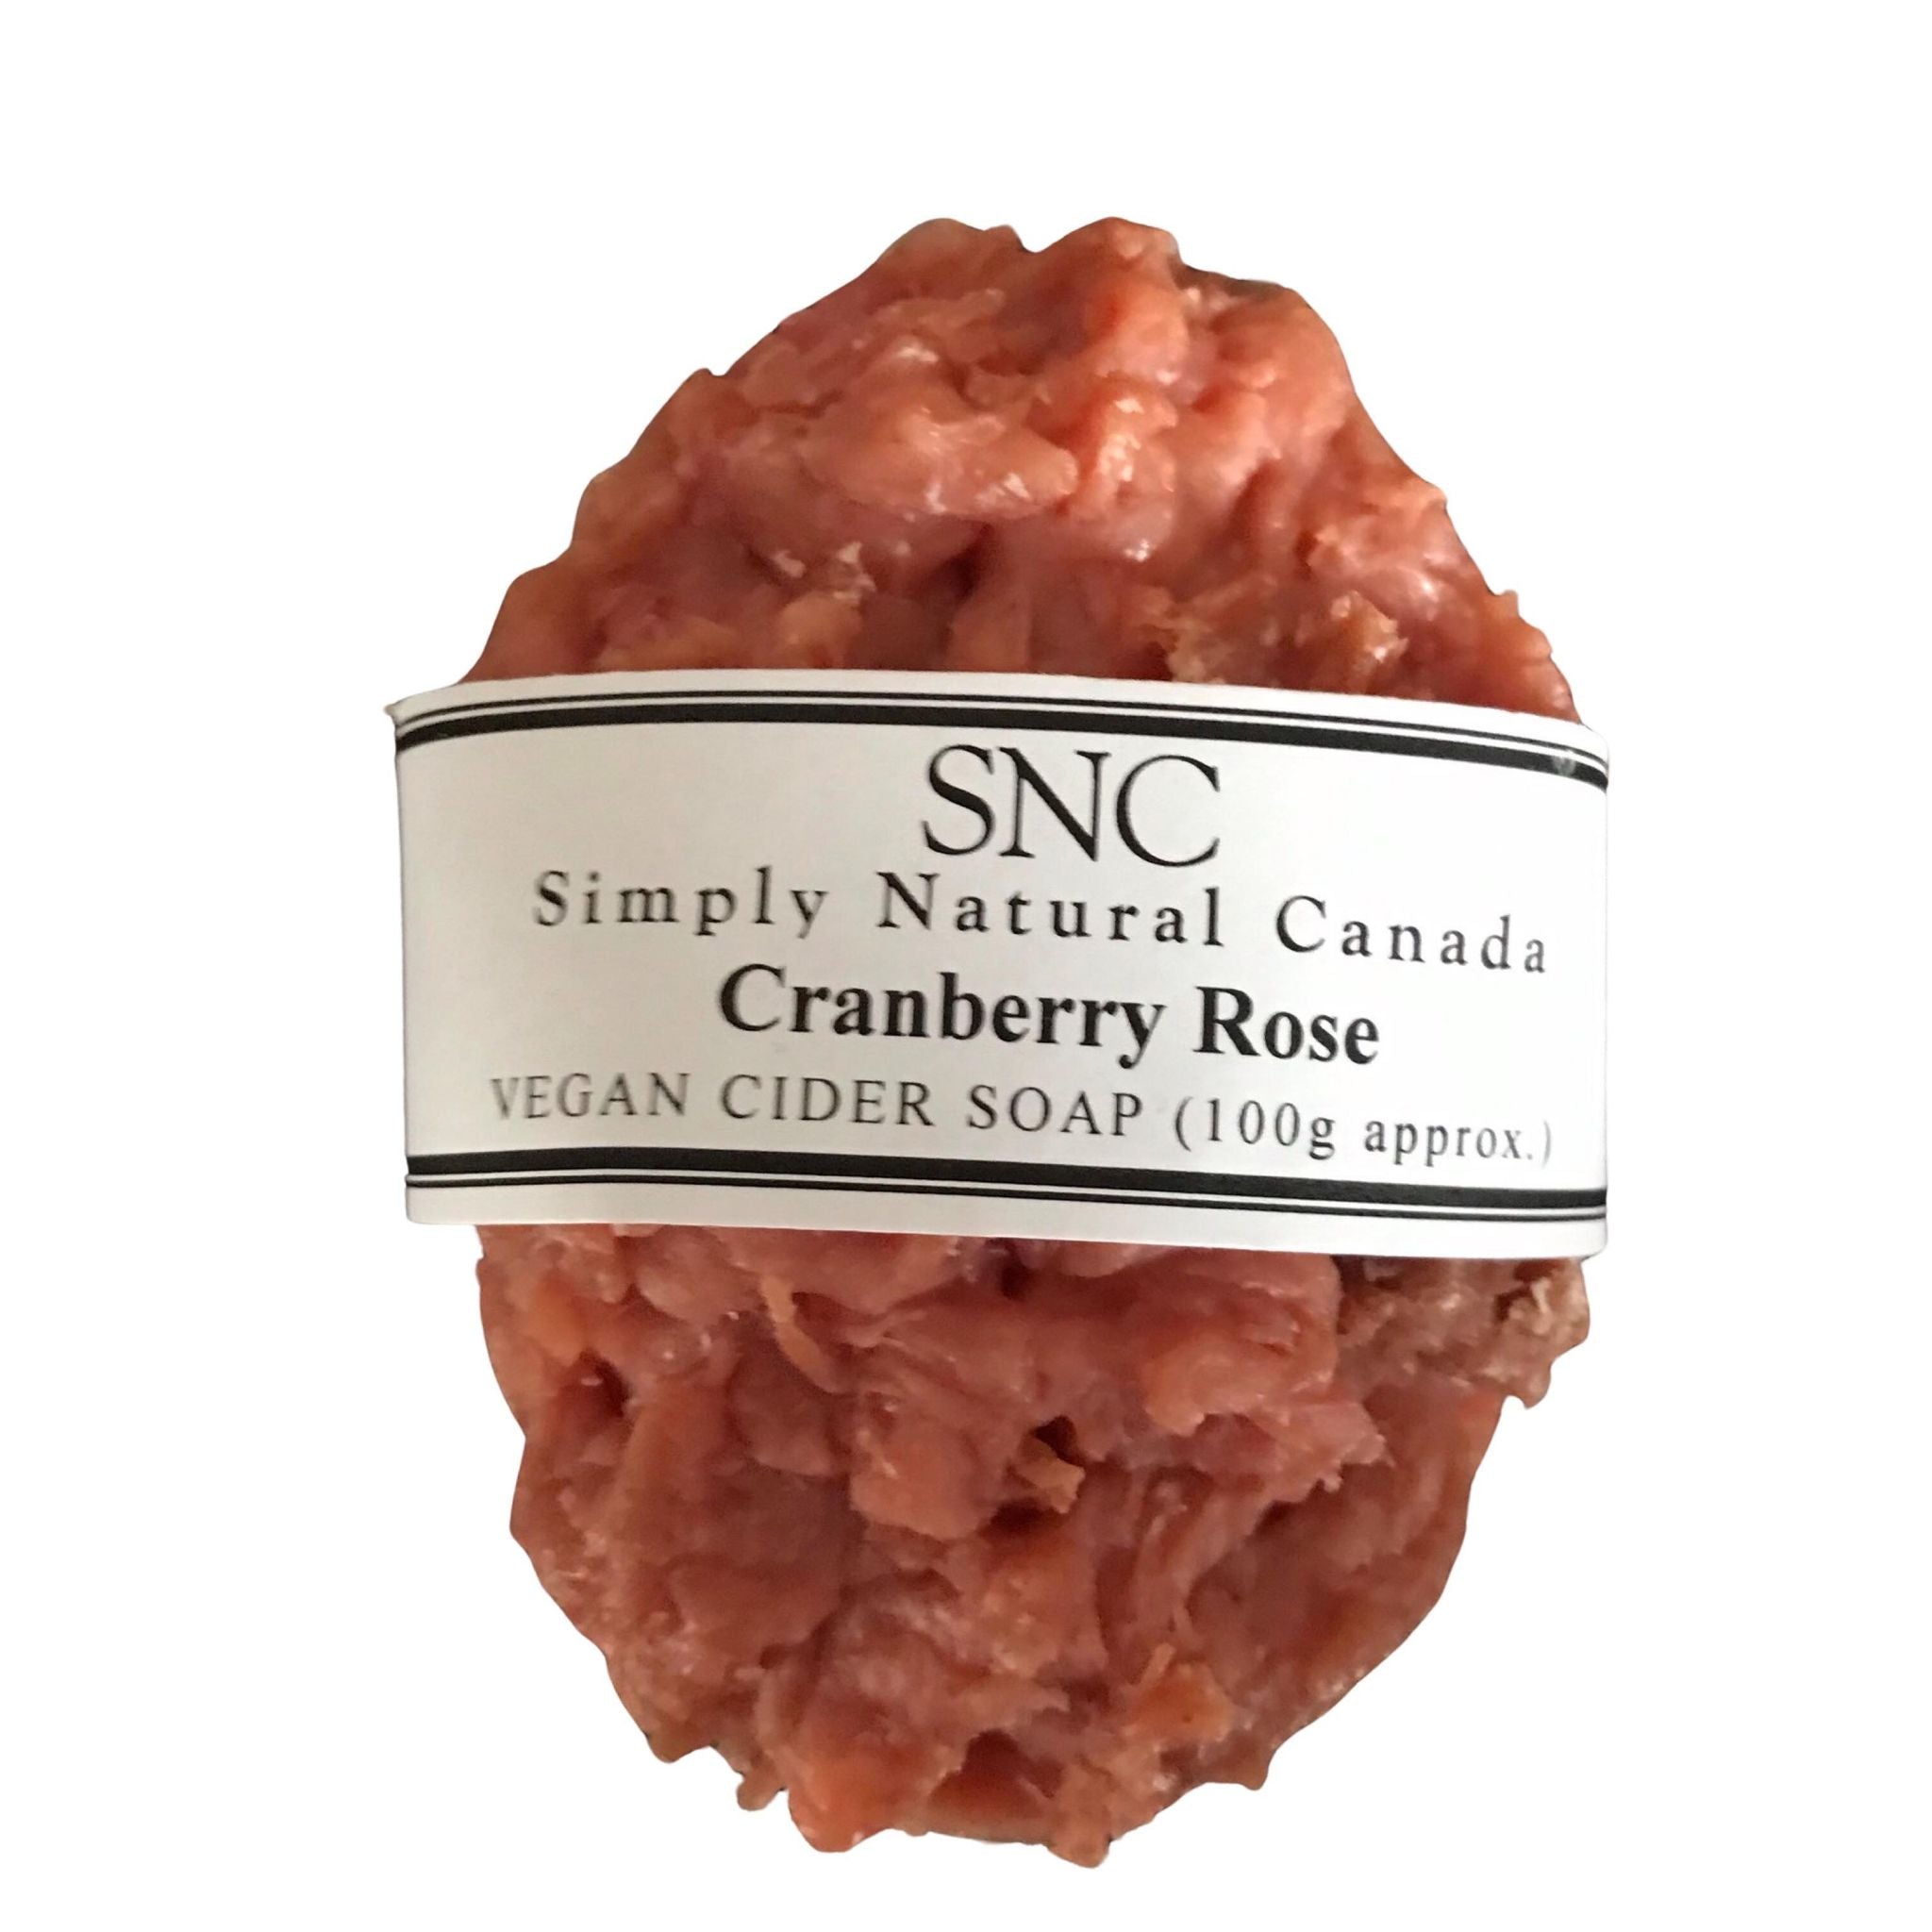 Simply Natural Canada oval cranberry vegan cider soap made in Canada with Ontario cranberry apple cider